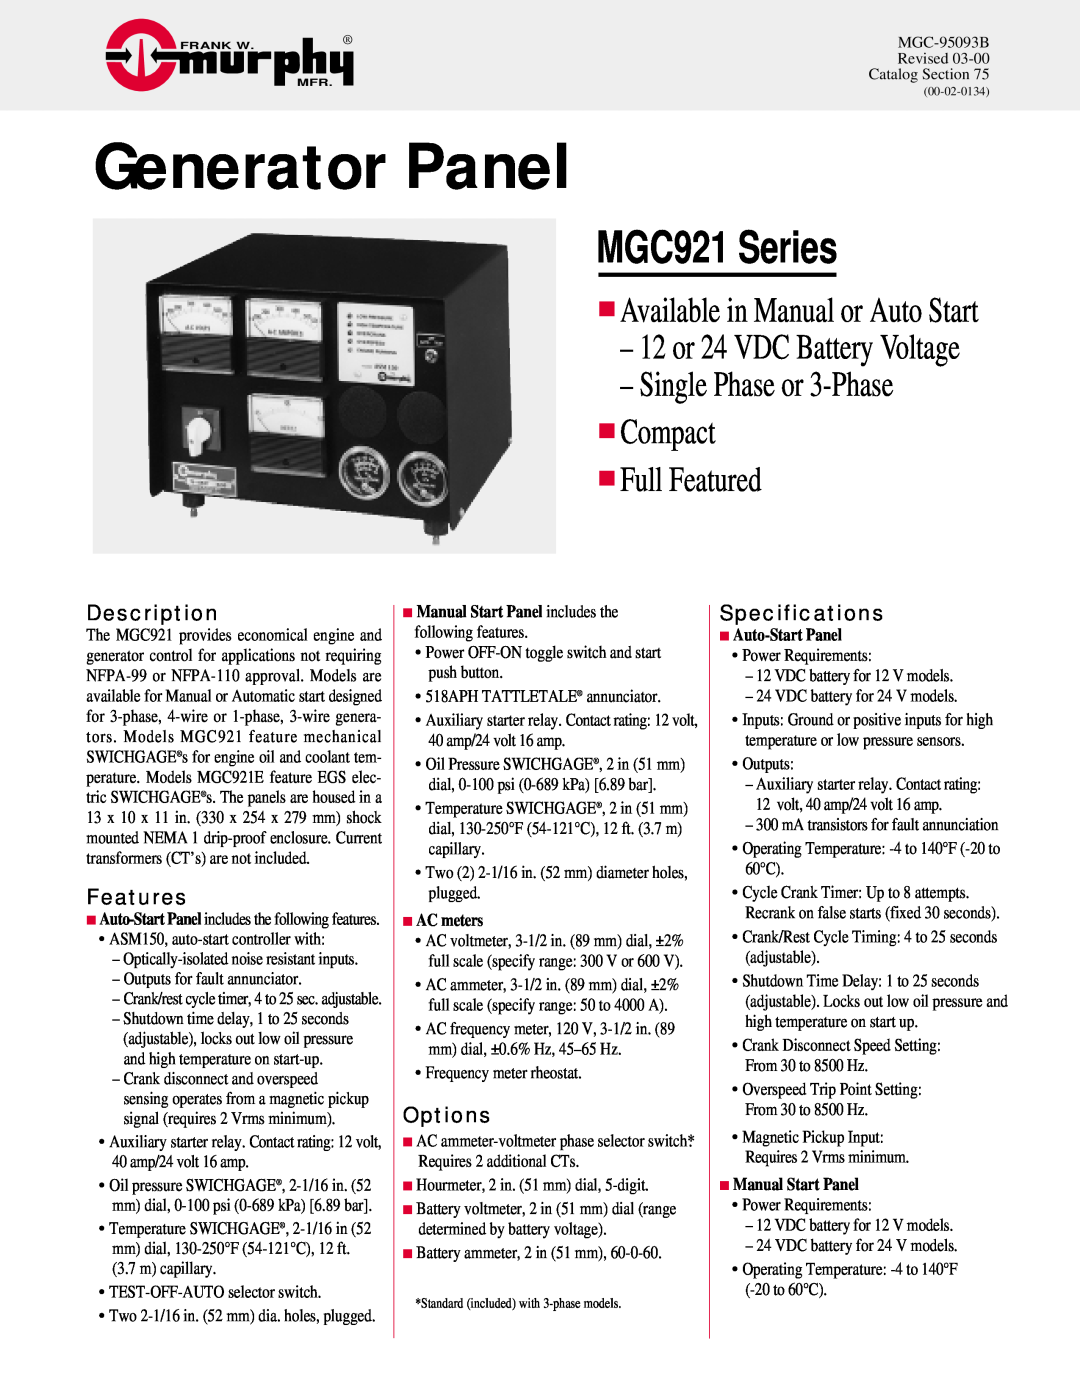 Murphy MGC921 Series specifications Generator Panel, Single Phase or 3-Phase Compact Full Featured, Description, Features 